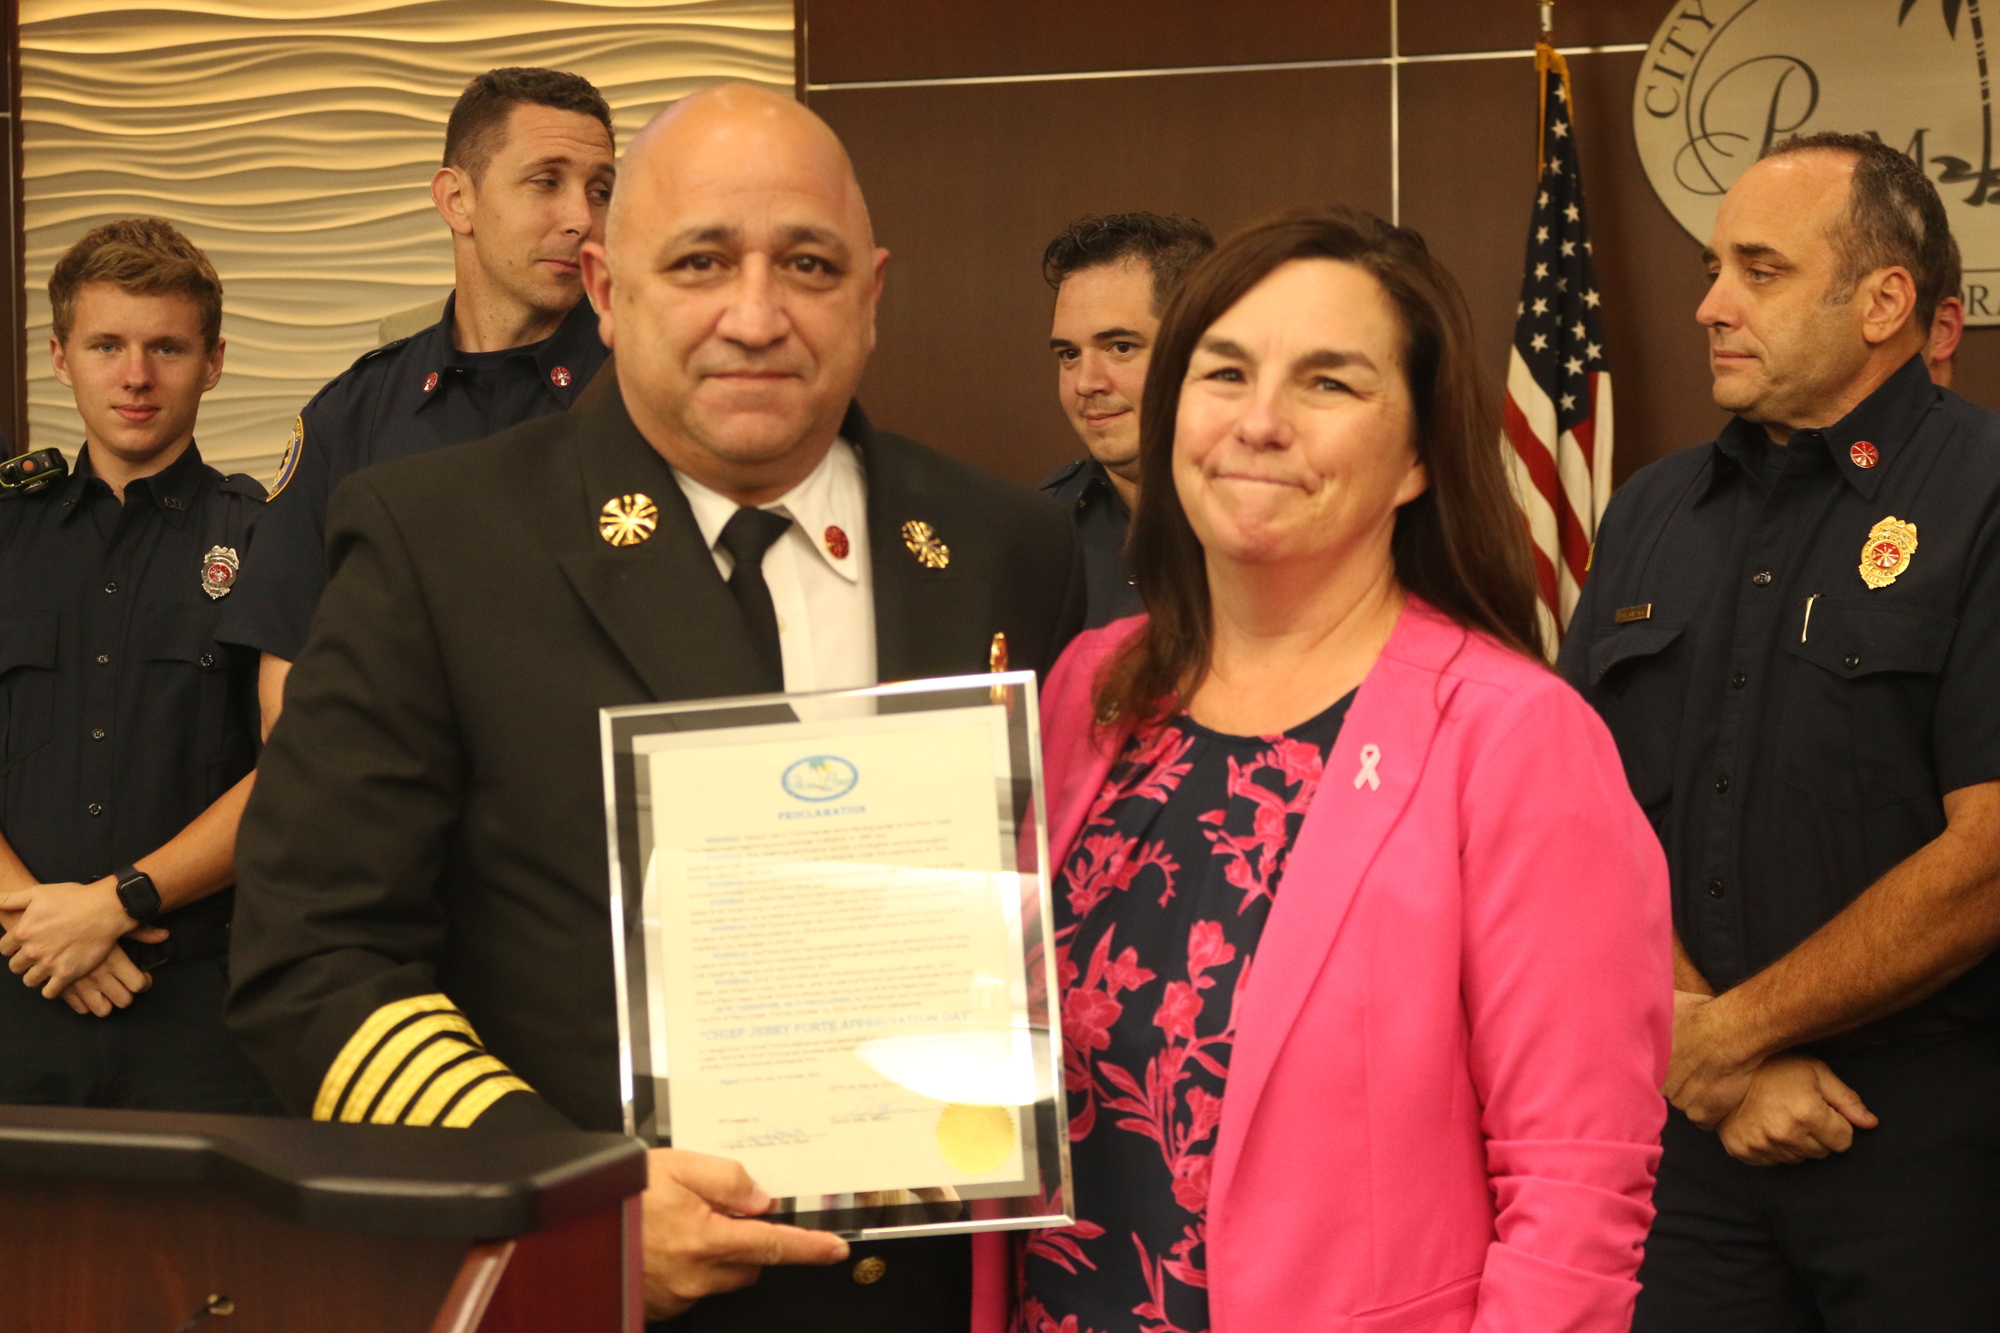 Chief Jerry Forte accepts the proclamation. Photo by Sierra Williams